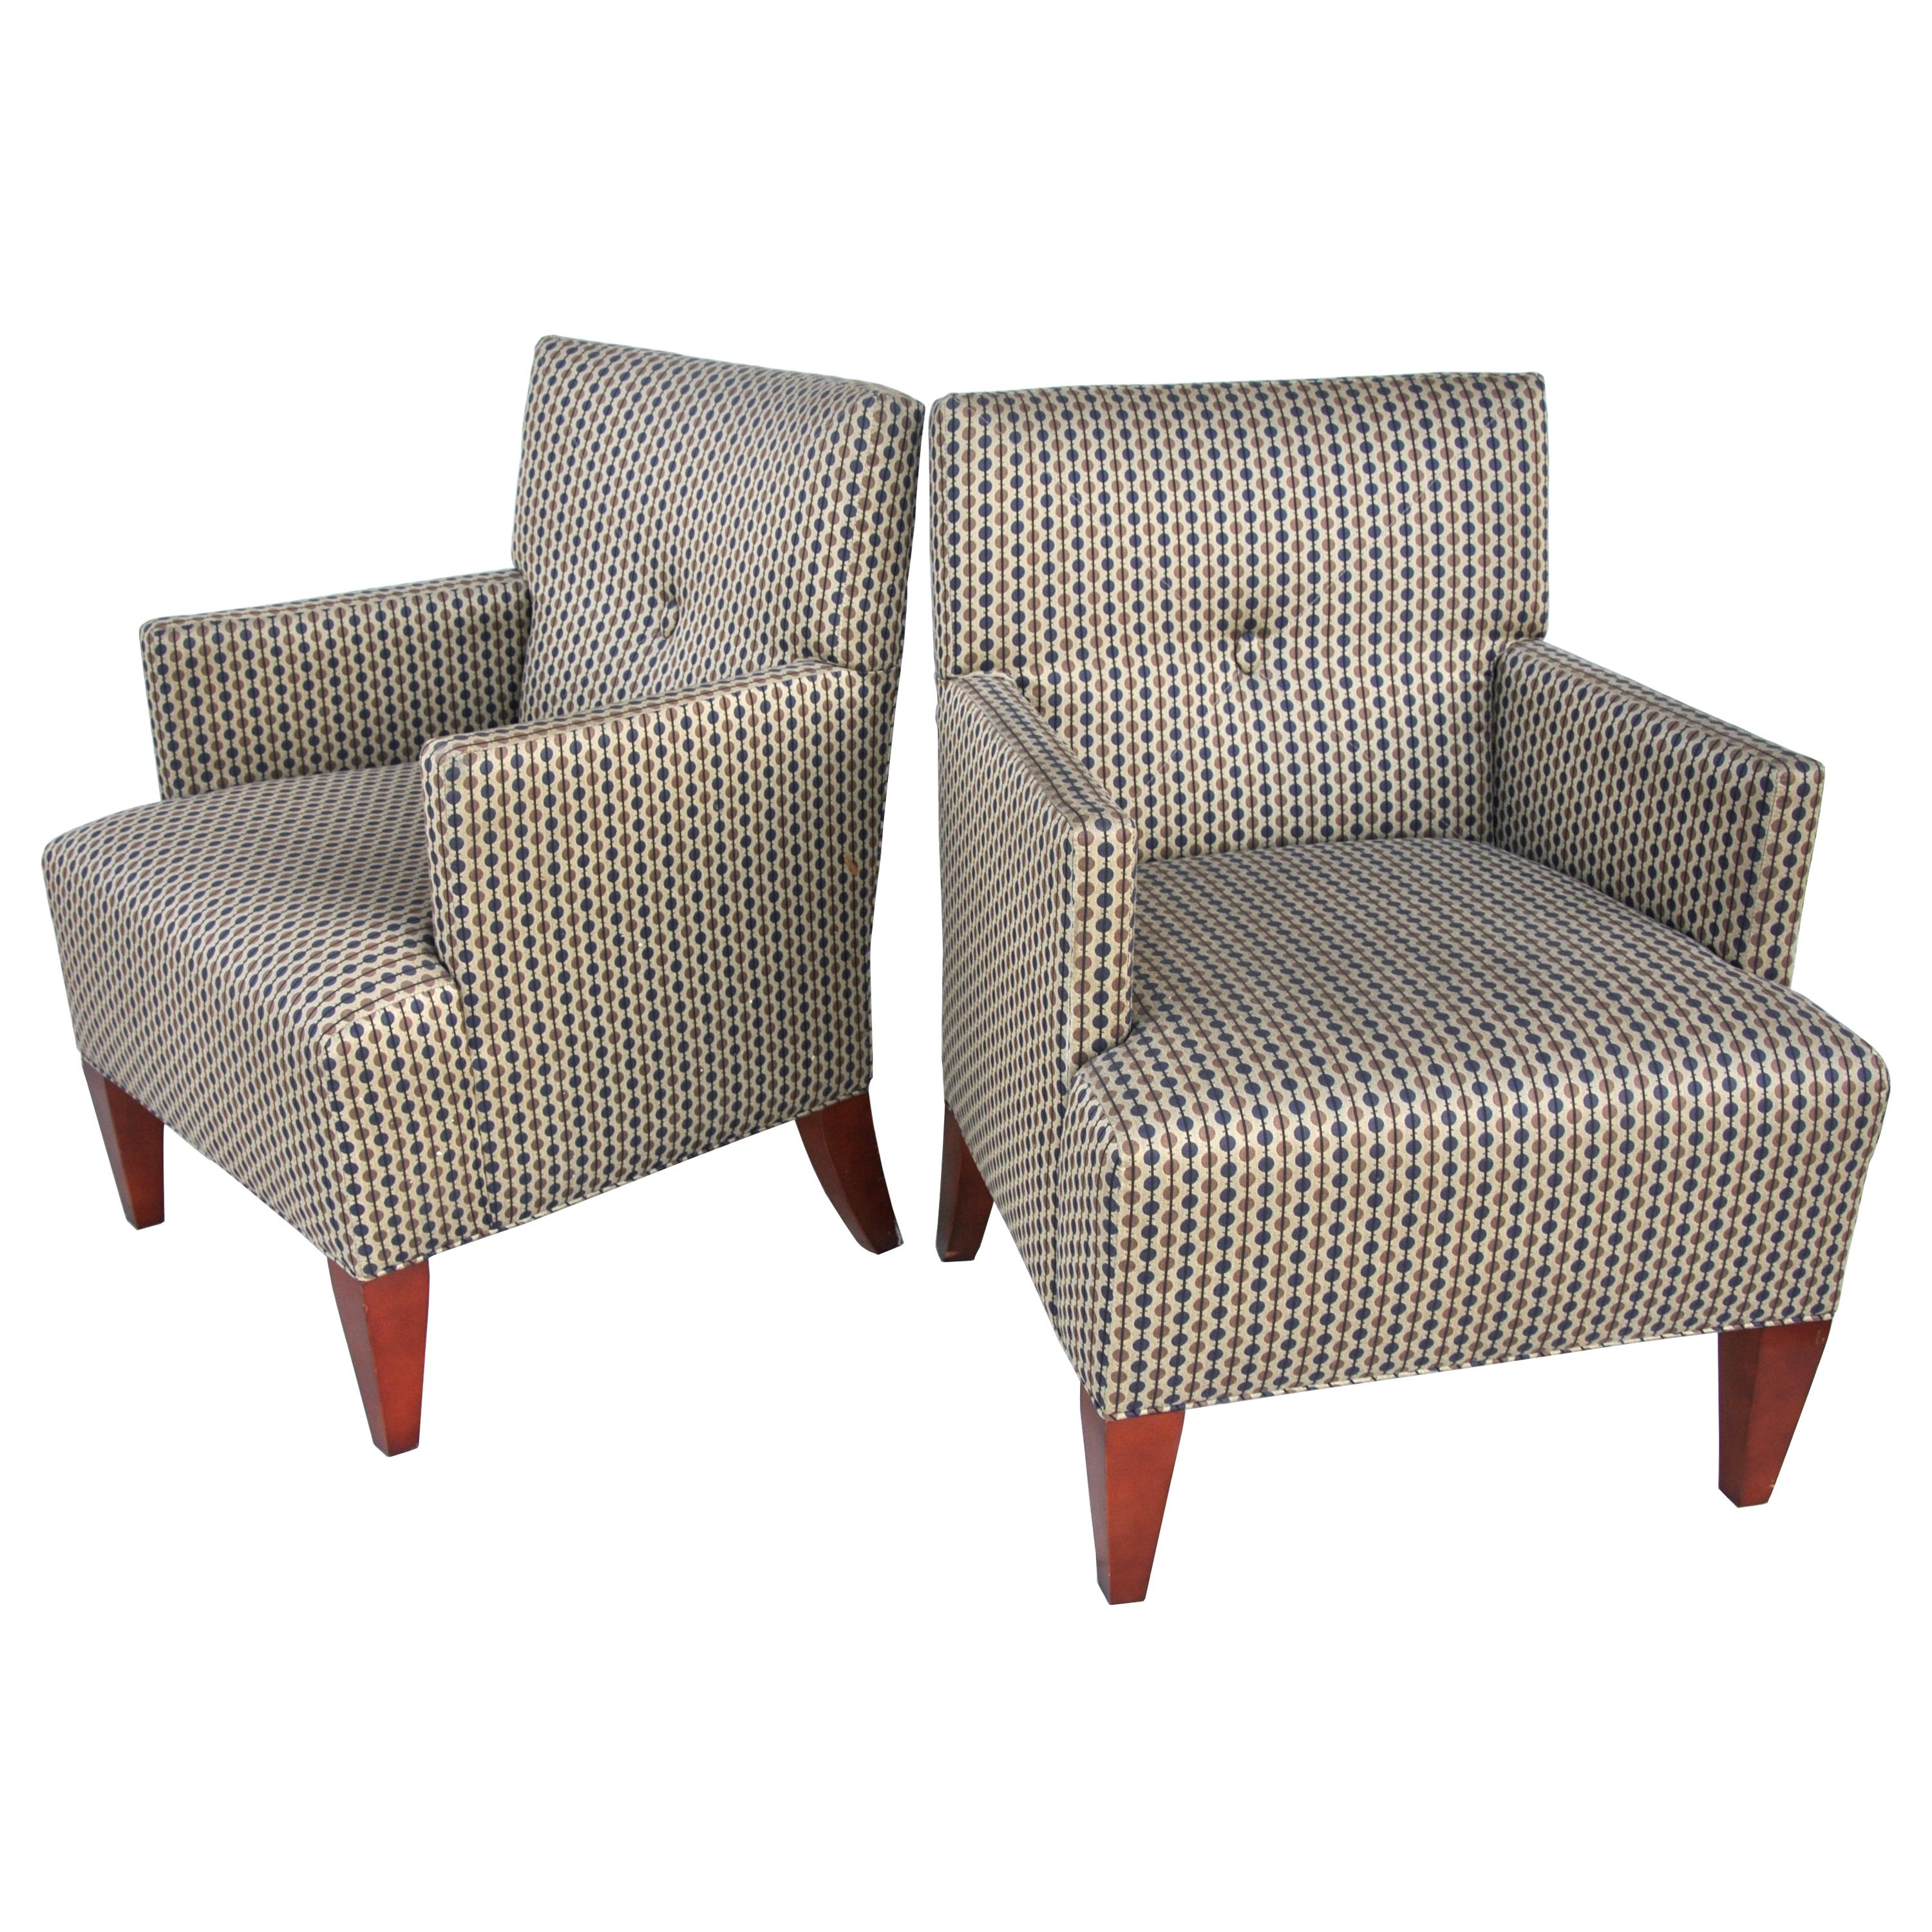 Pair of Modern Lounge Chairs by Hickory Furniture